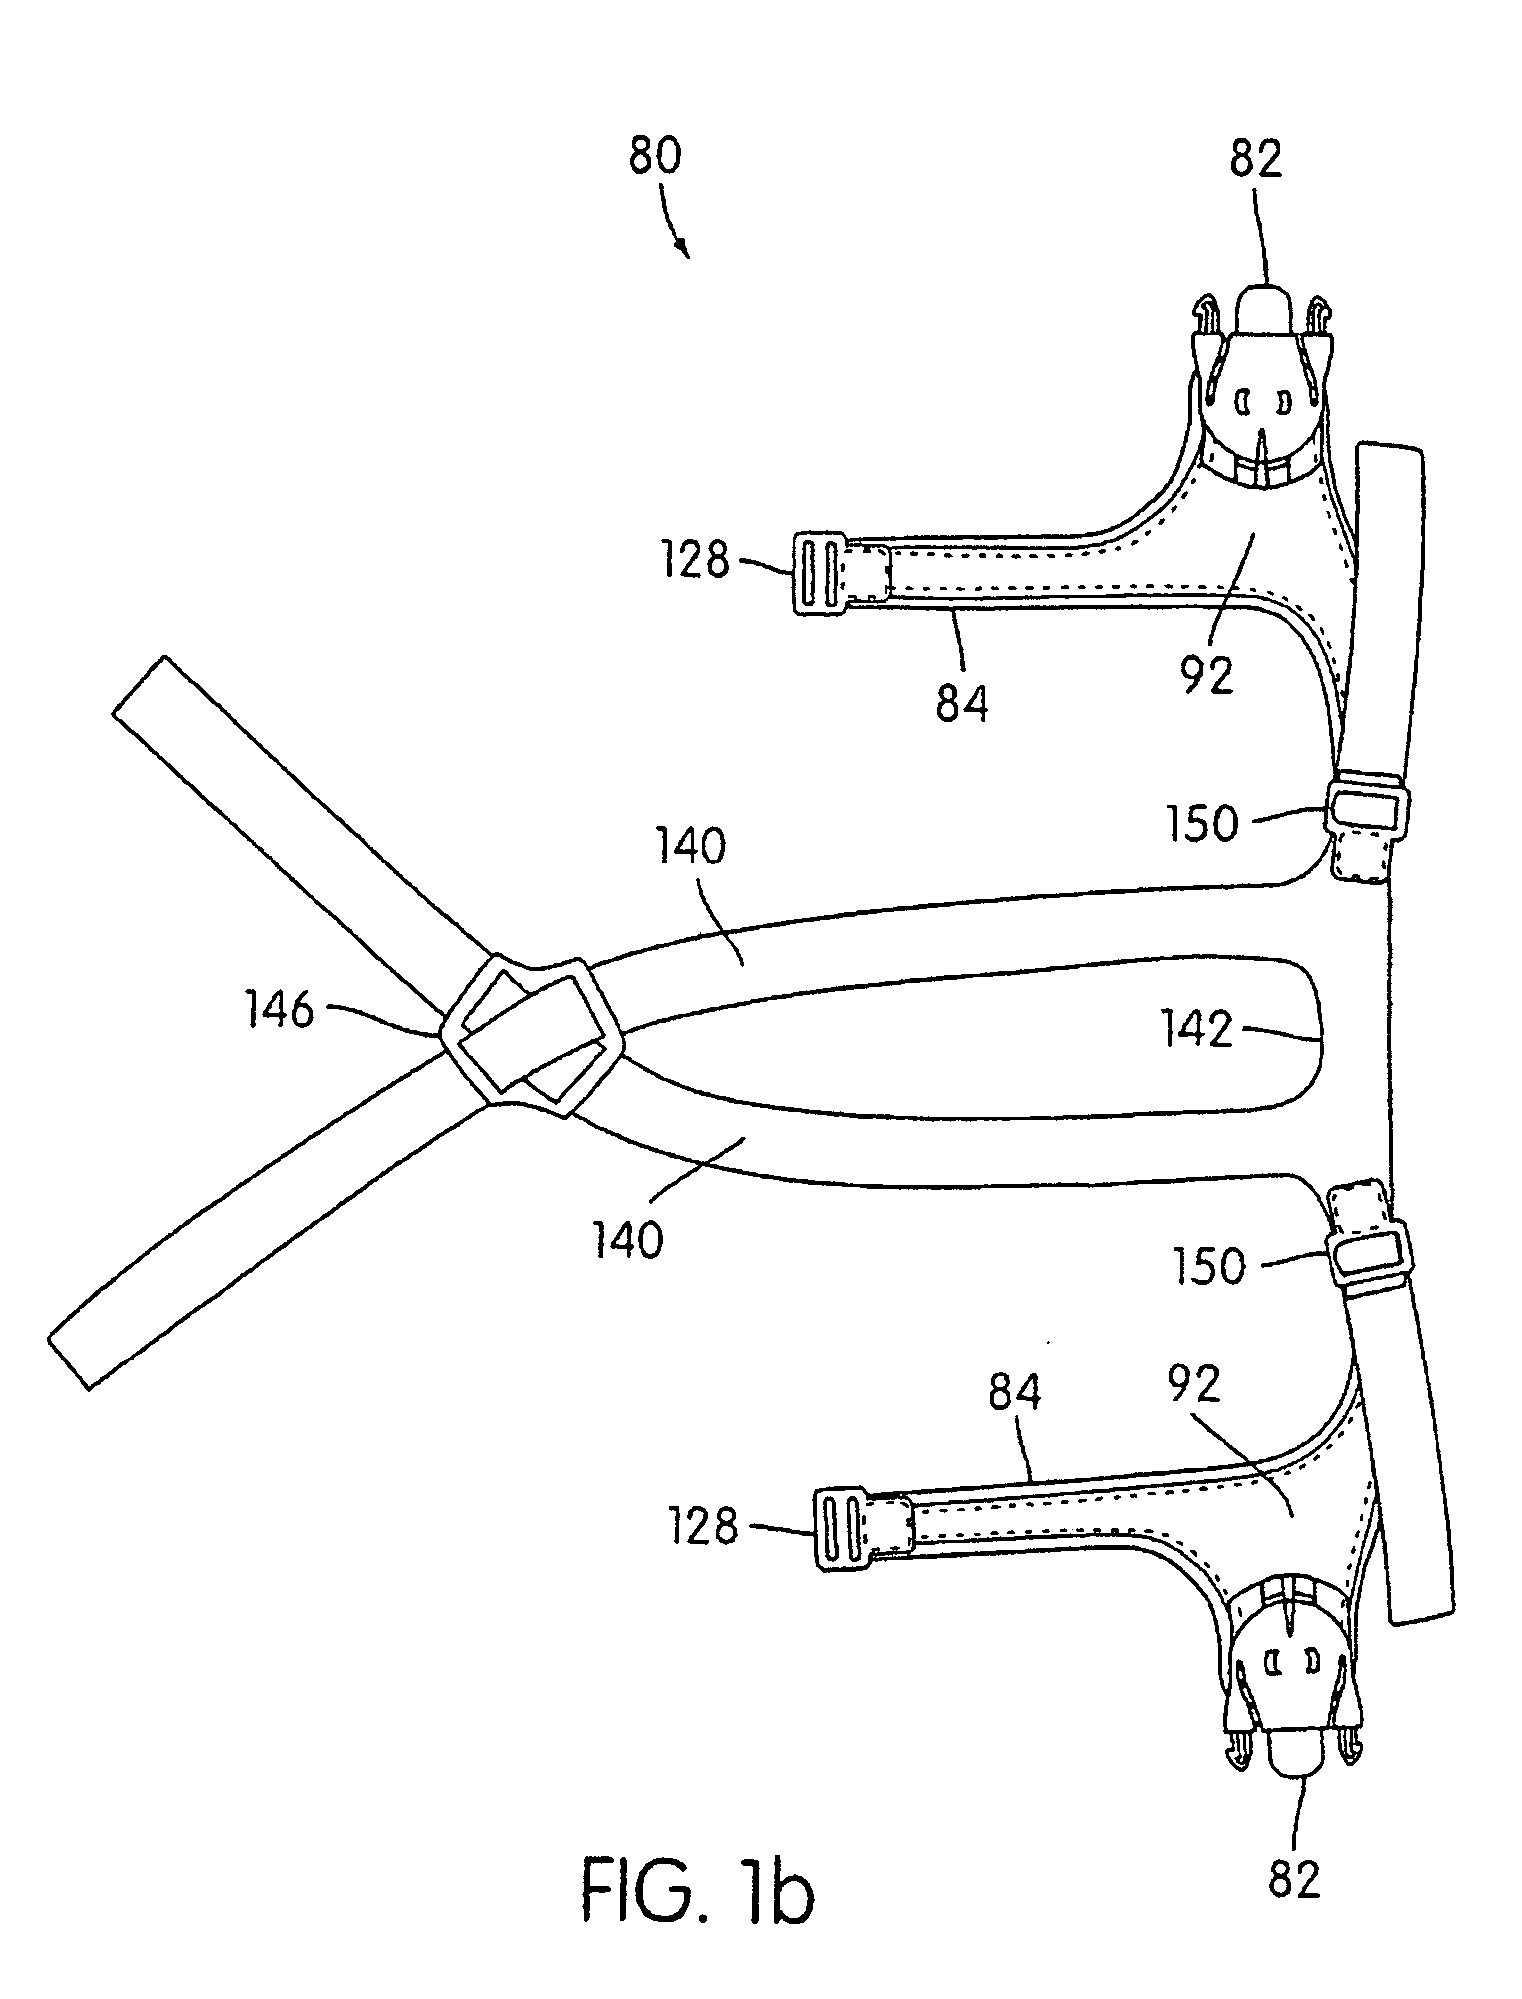 Respiratory mask assembly with magnetic coupling to headgear assembly